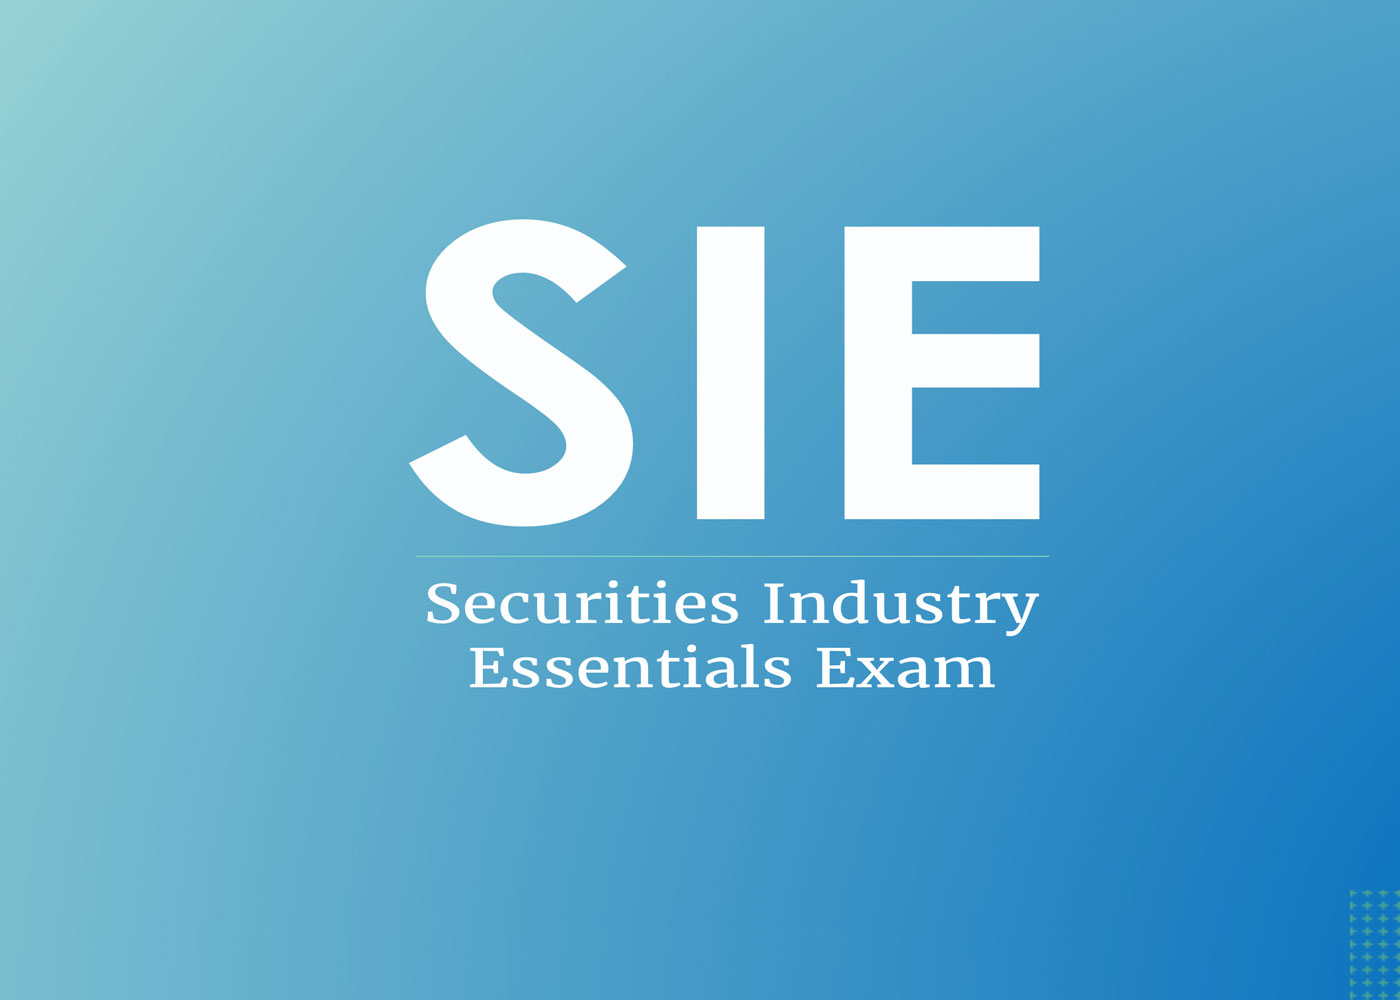 FINRA Rules to Know for the SIE Exam